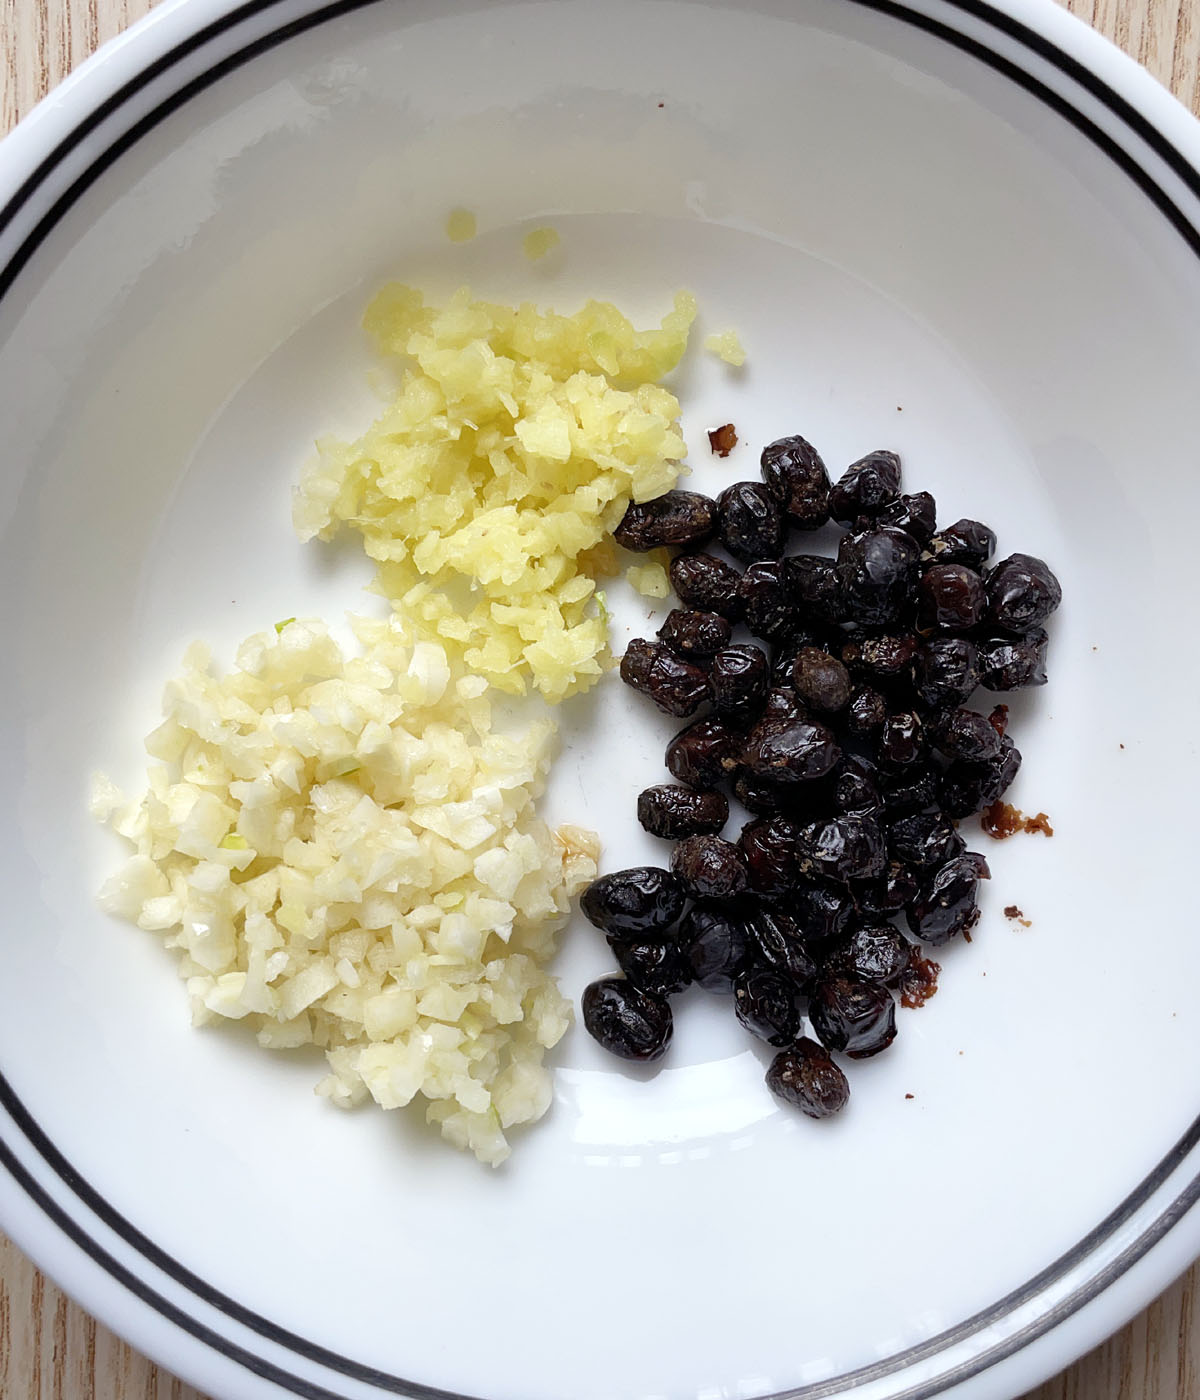 A round white bowl containing black beans, minced ginger, and minced garlic.